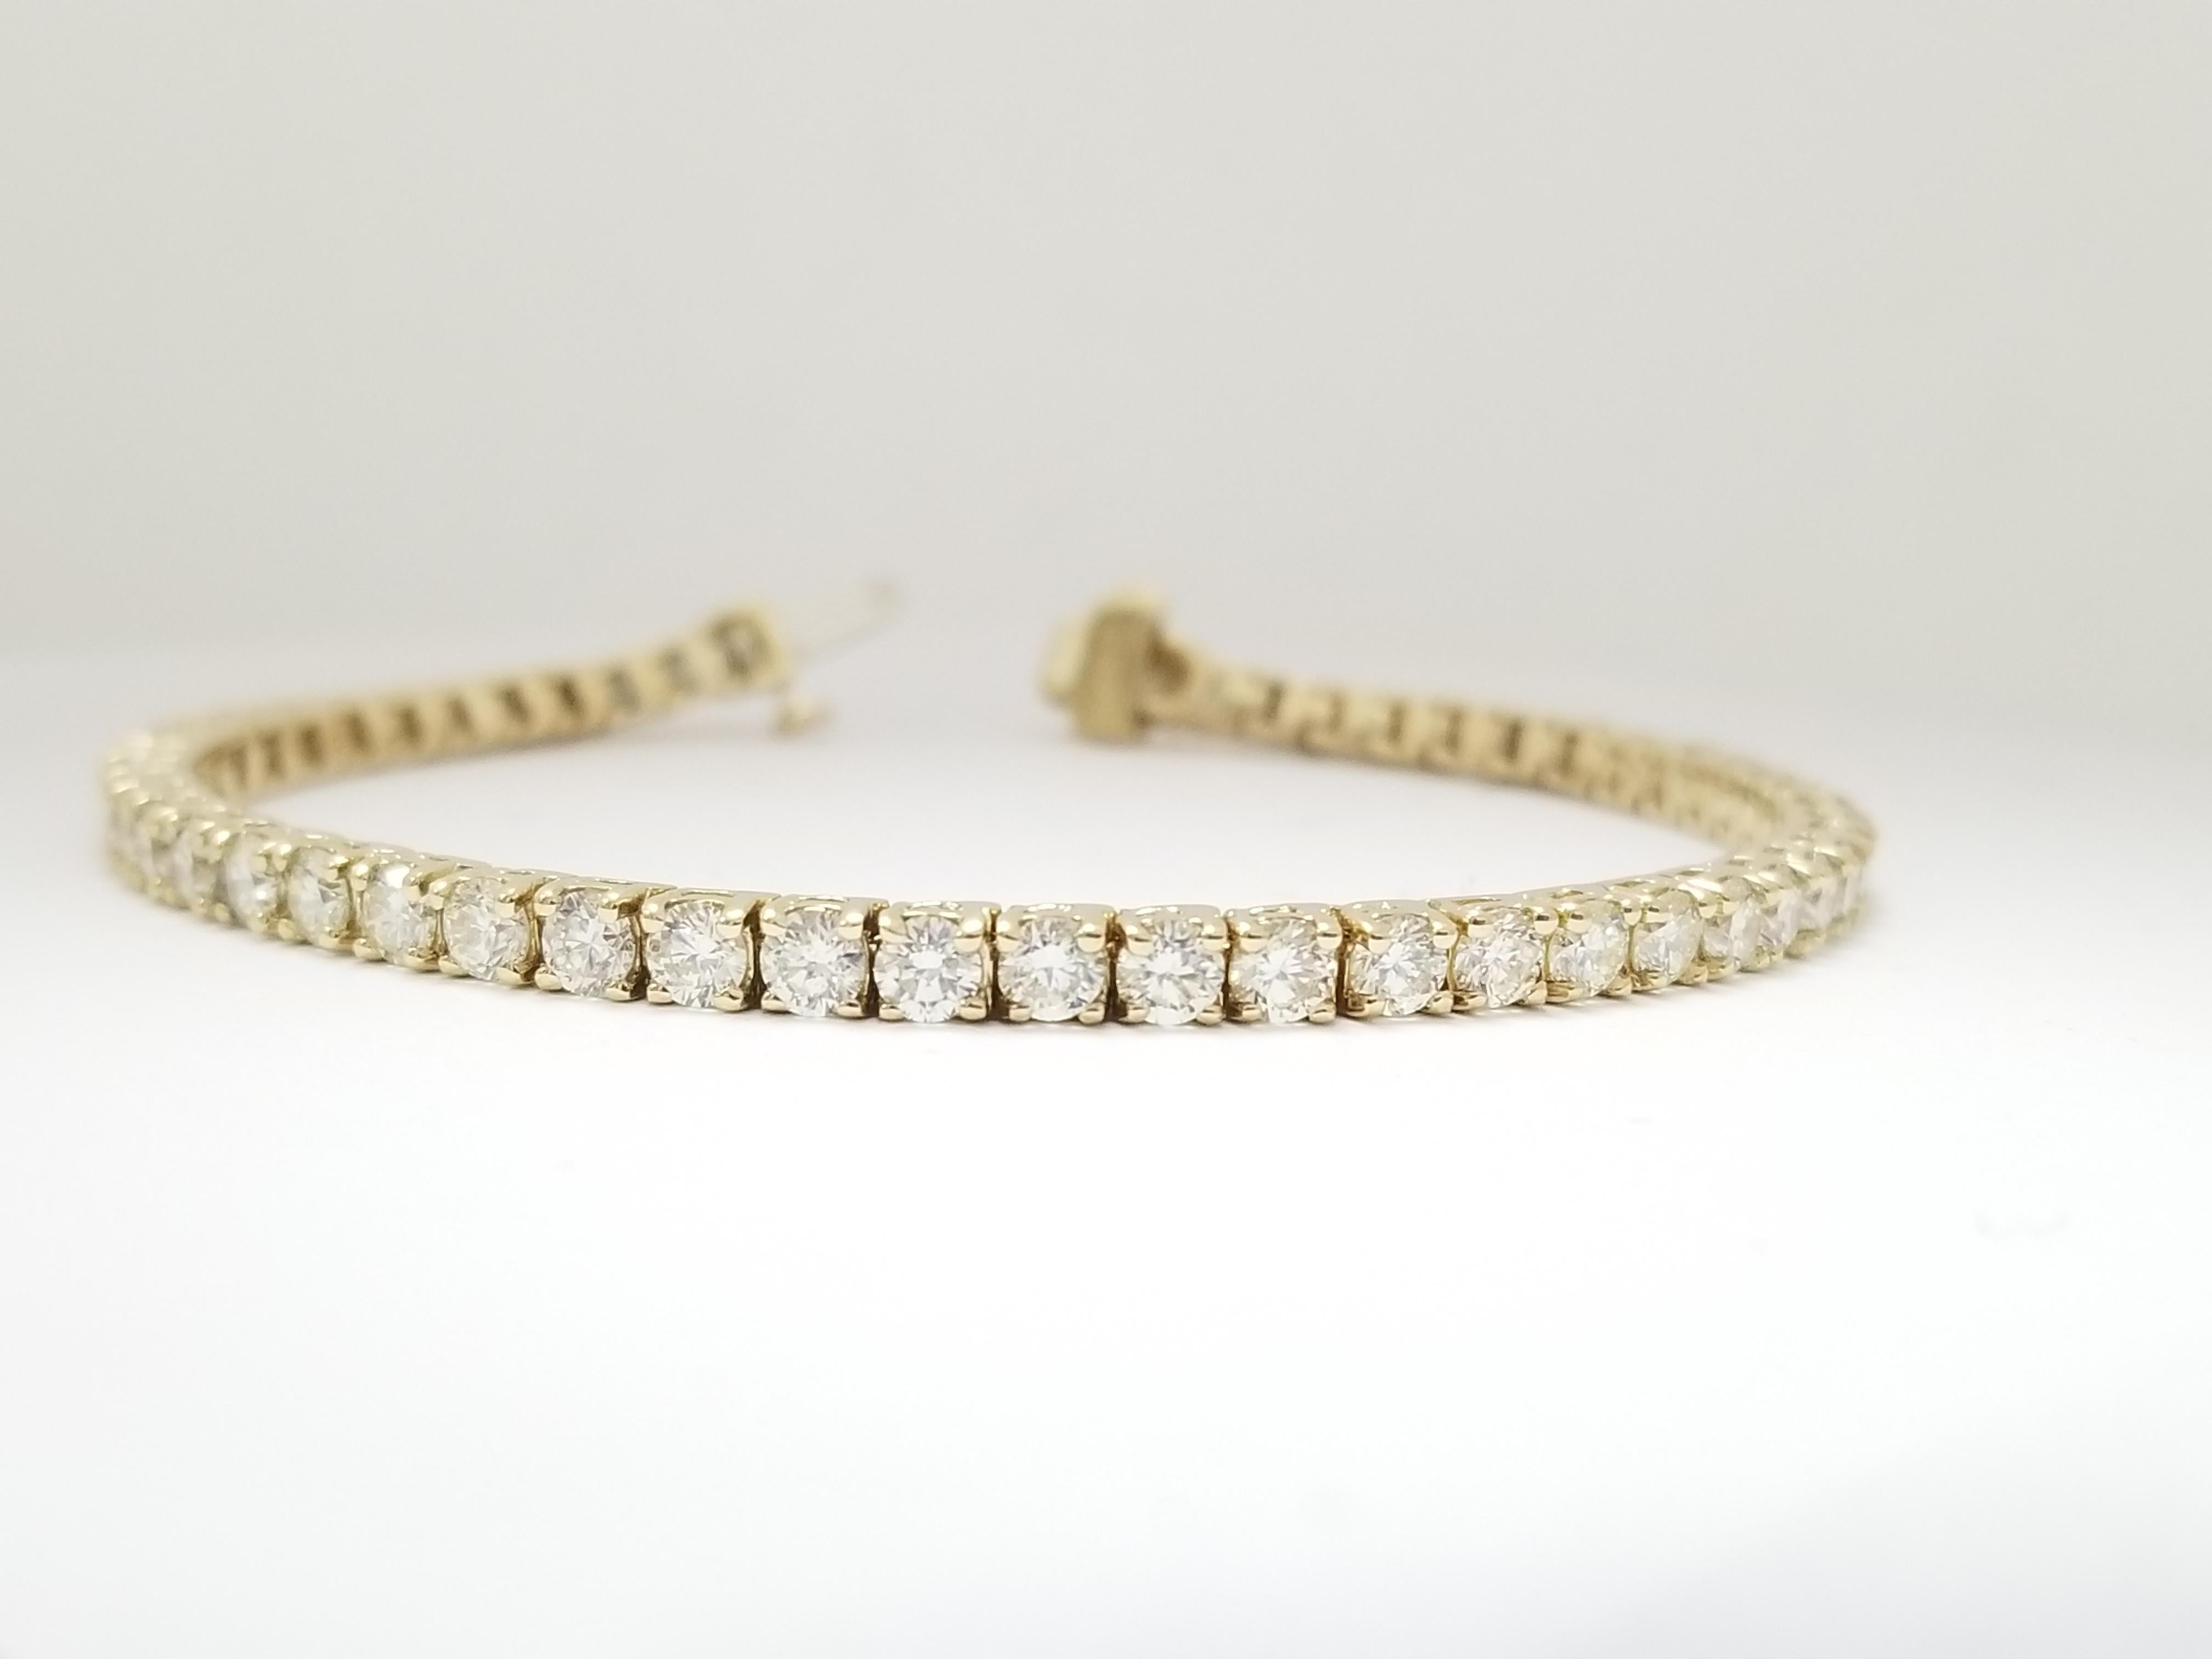 A quality tennis bracelet, round-brilliant cut diamonds. set on 14k yellow gold. each stone is set in a classic four-prong style for maximum light brilliance. 7 inch length. 3.2 mm wide , Average Color H-I, Clarity VS.